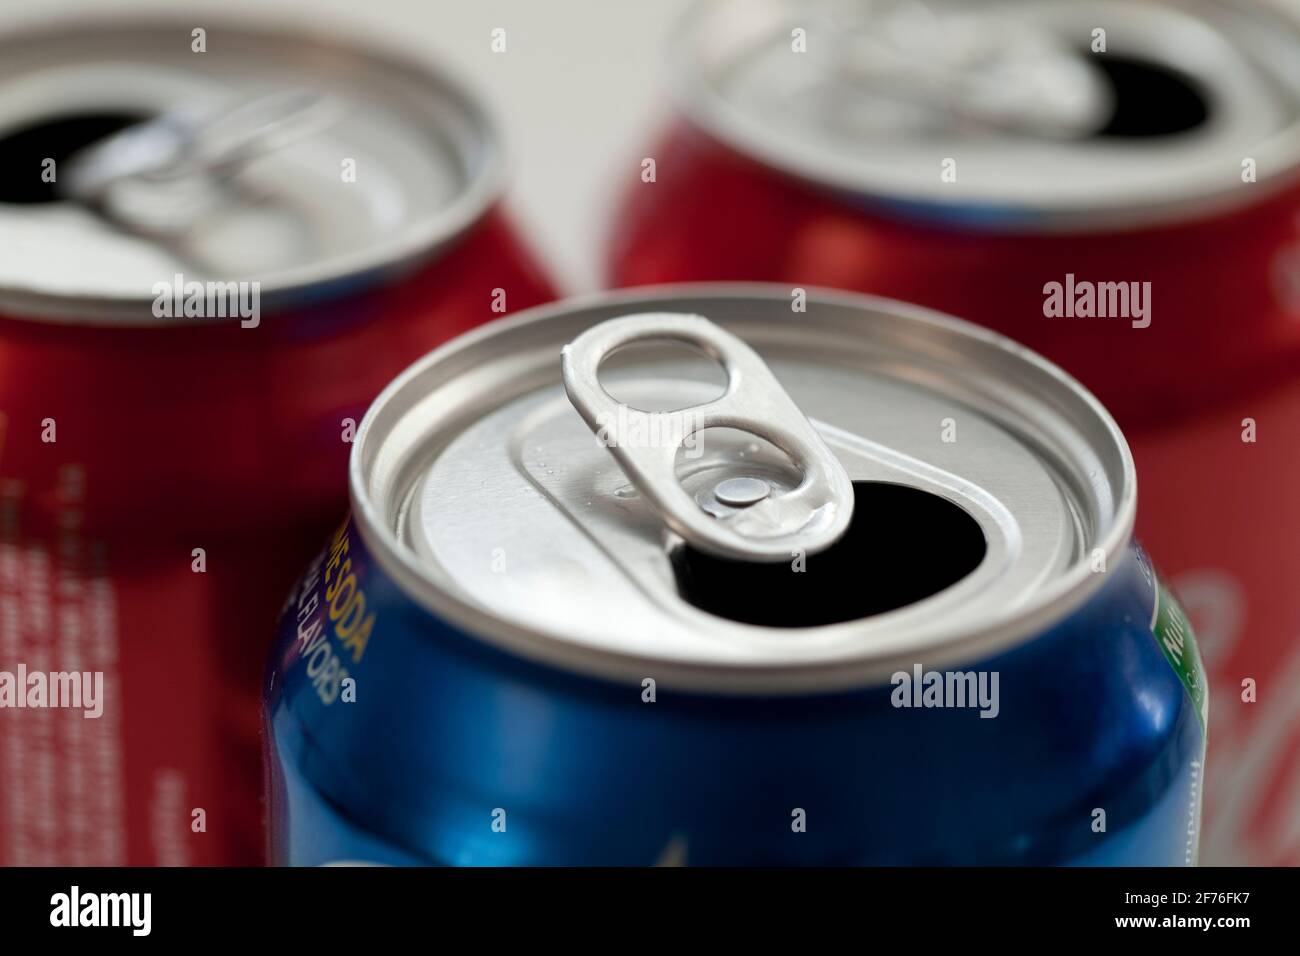 Open soda cans (pop cans, aluminum cans, aluminium cans) - USA Stock Photo